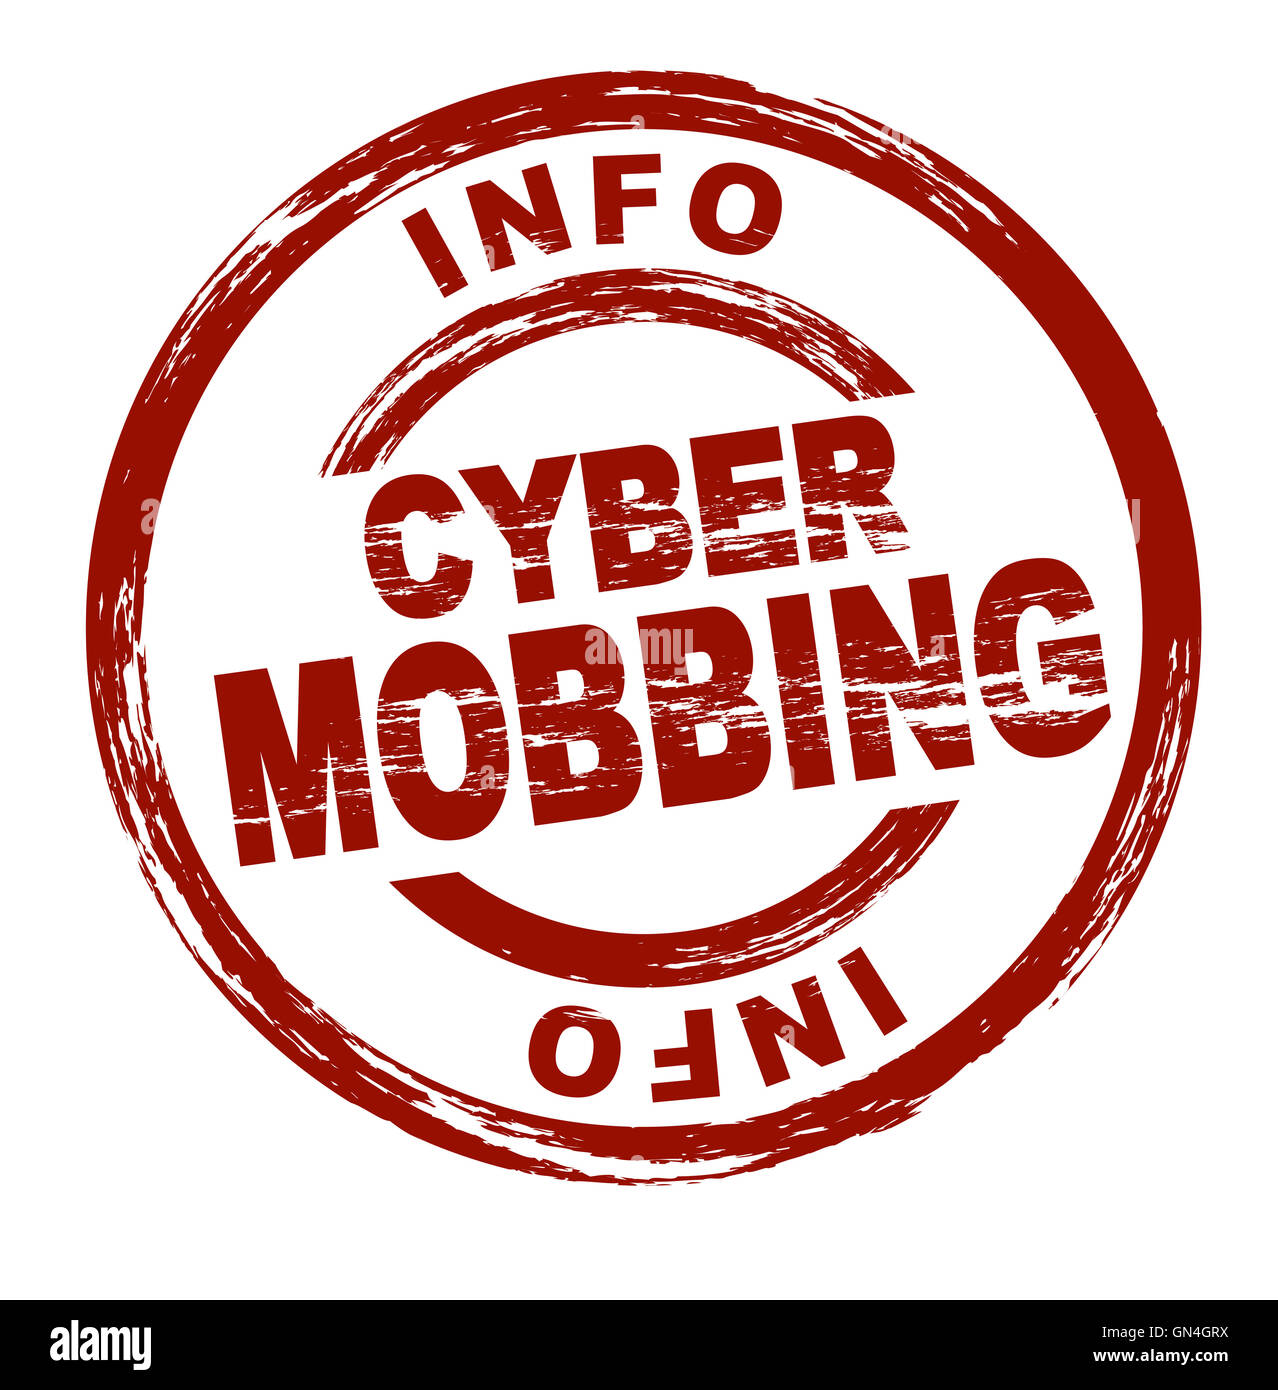 Stamp - Cyber mobbing (Engl.: cyber bullying) Stock Photo